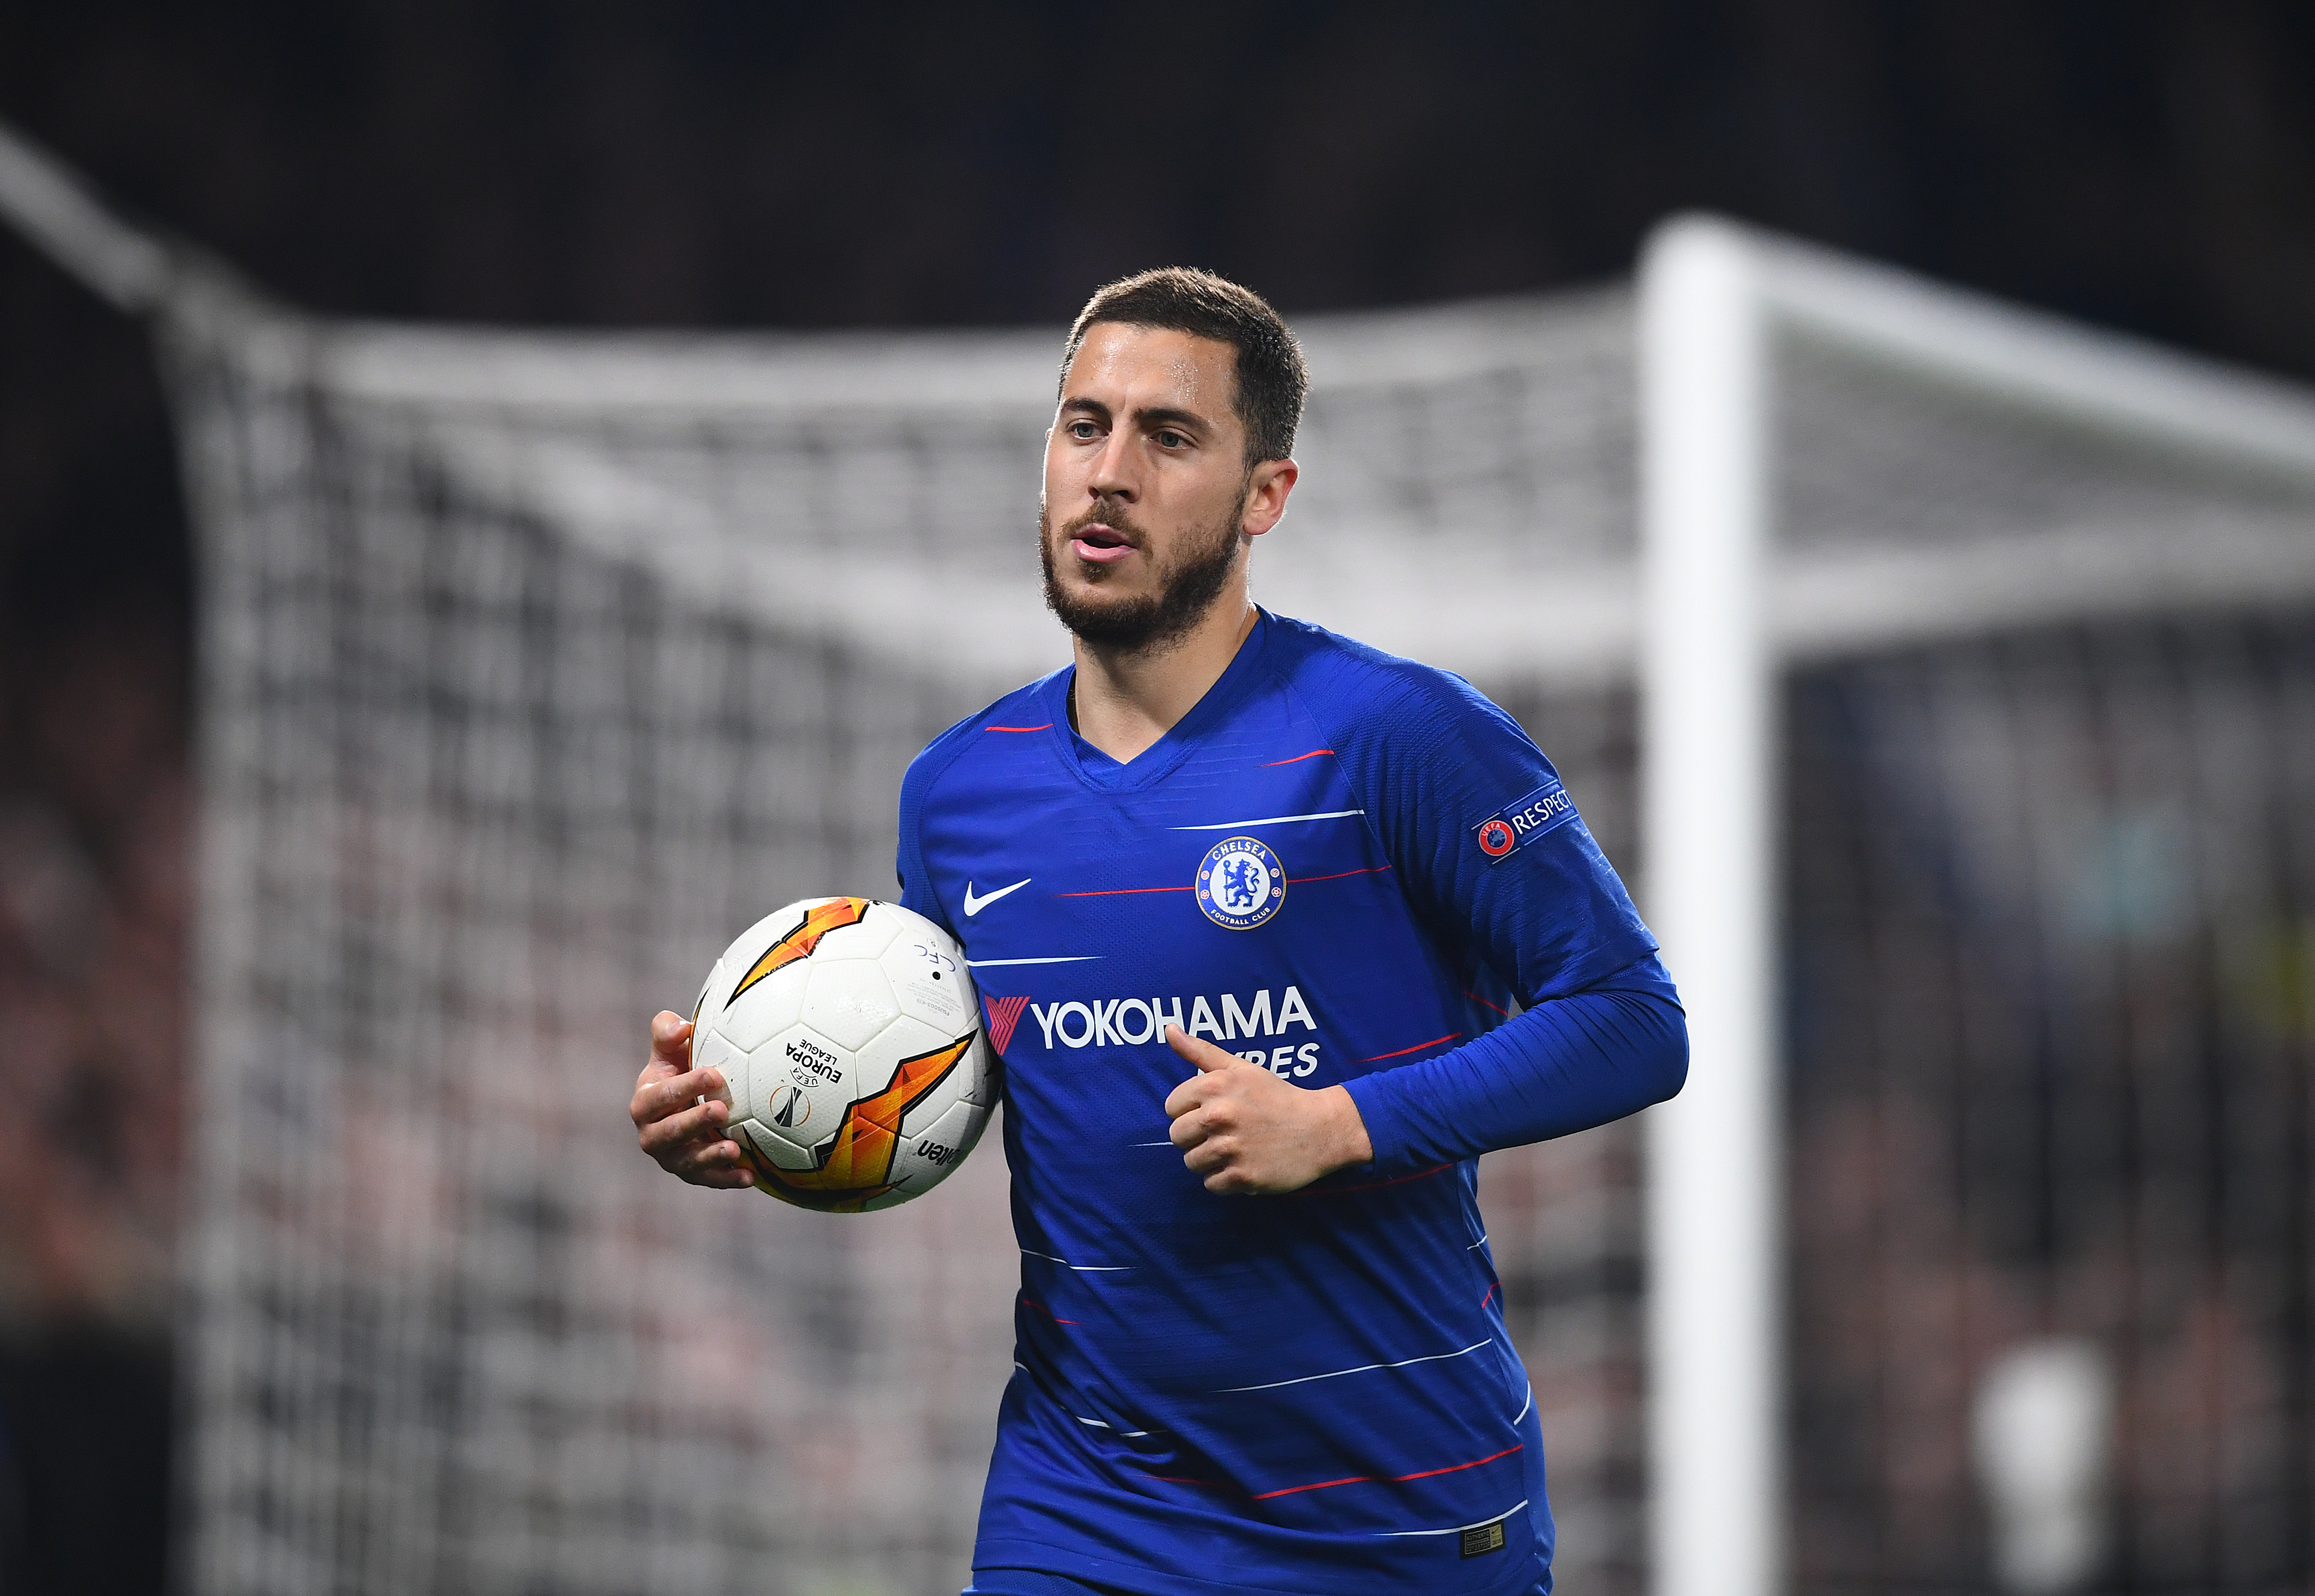 Chelsea's hopes will be riding on the shoulders of Hazard (Photo by Clive Mason/Getty Images)